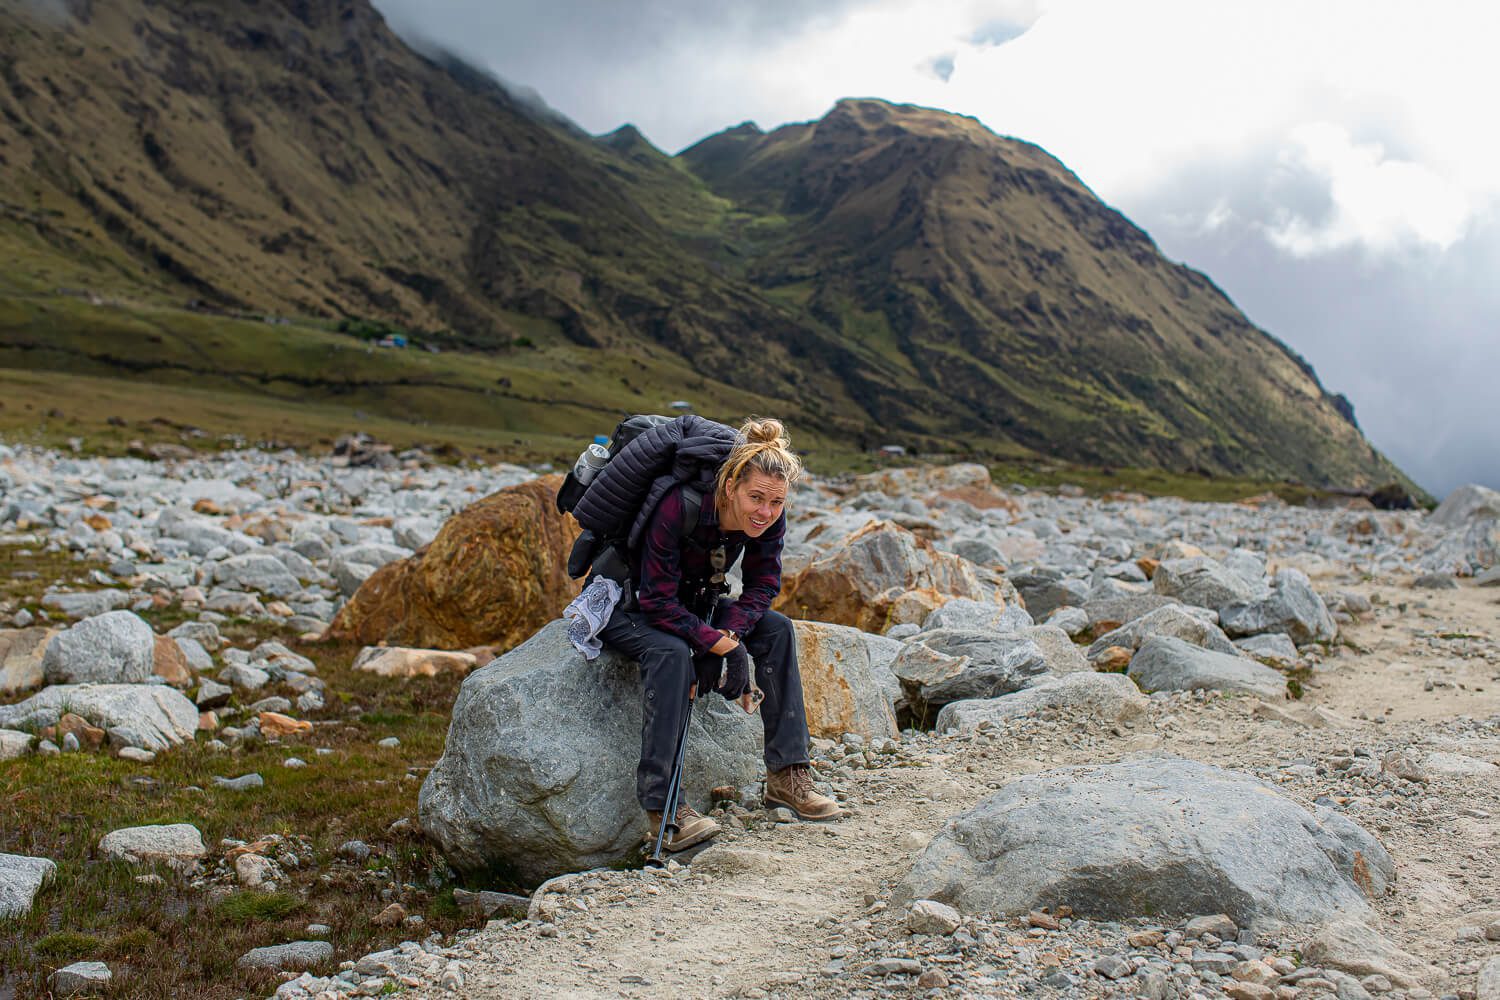 I'm Jess Traveling exhausted on the Salkantay Trek